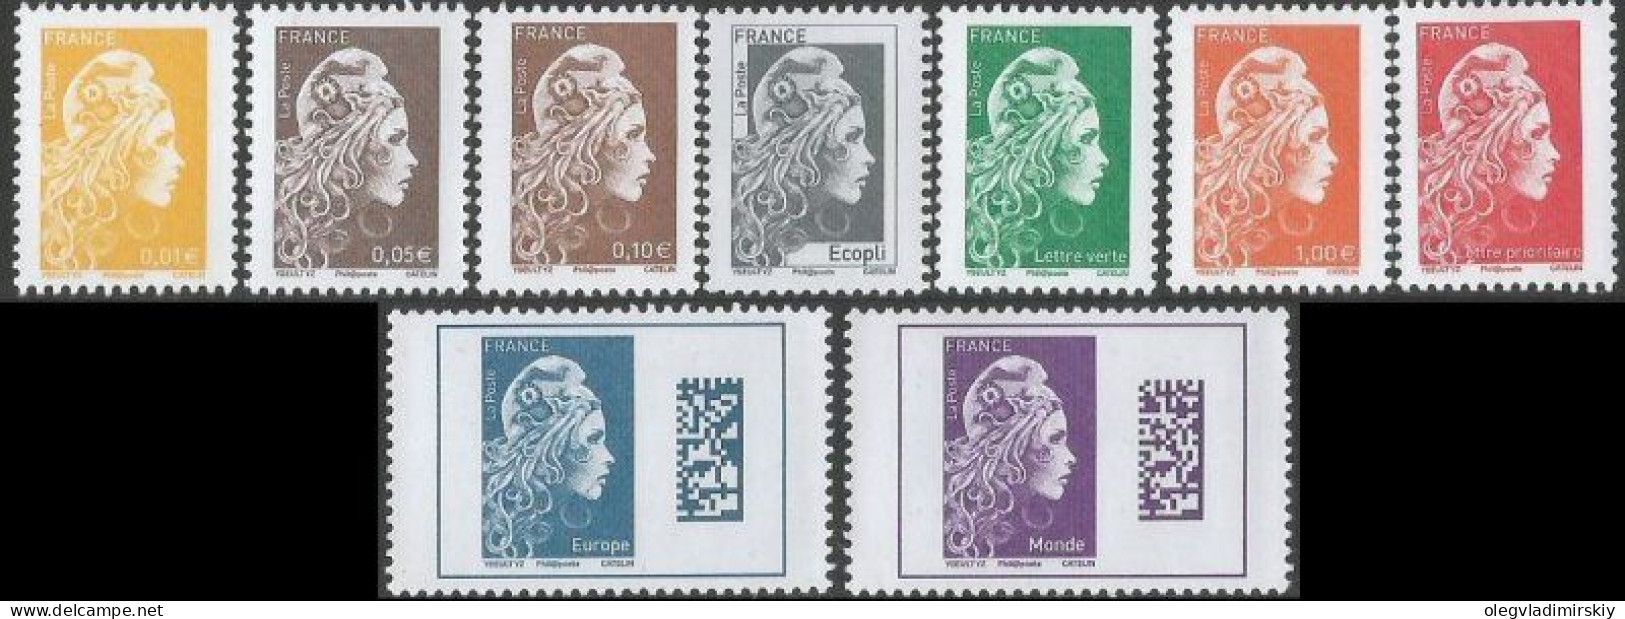 France 2018 Definitives Marianne 20.06.2018 Set Of 9 Perforated Stamps MNH - 2018-2023 Marianne L'Engagée